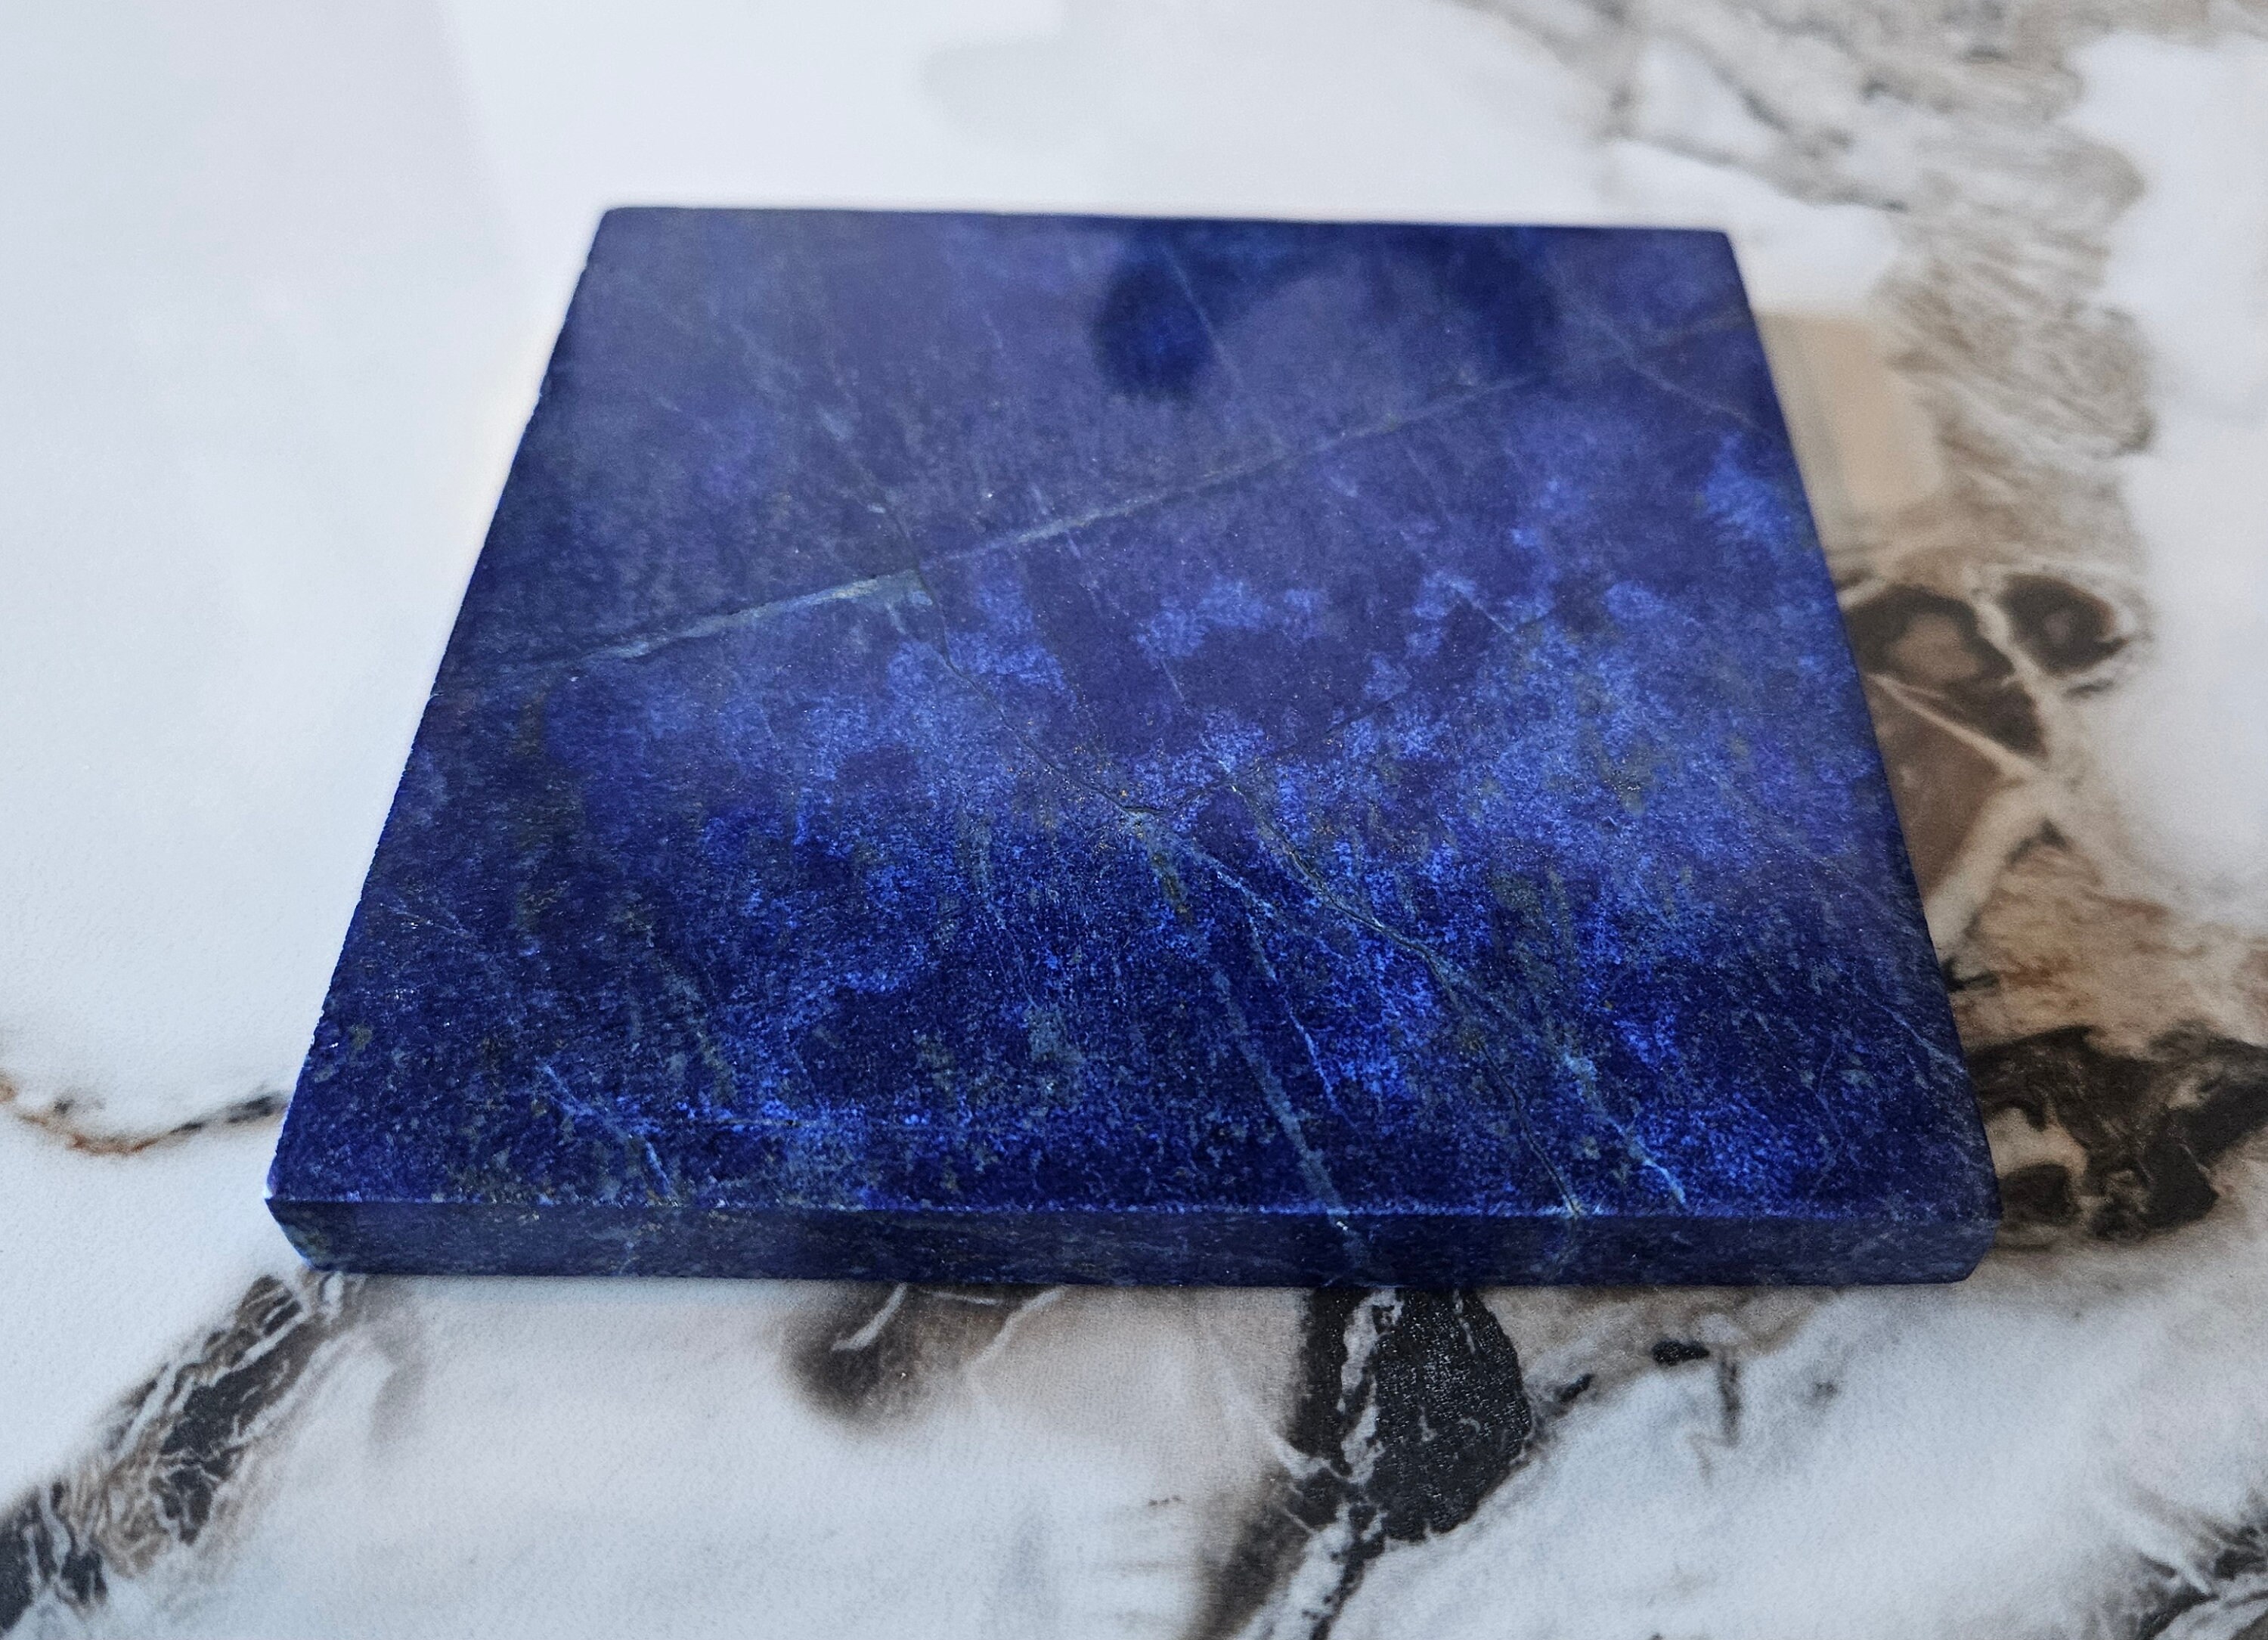 10x10 Lapis Lazuli Stone Tile | Crystal Gifts, Self Expression, Protection, intuition, flagstone, amplification, blue stone, cabochon